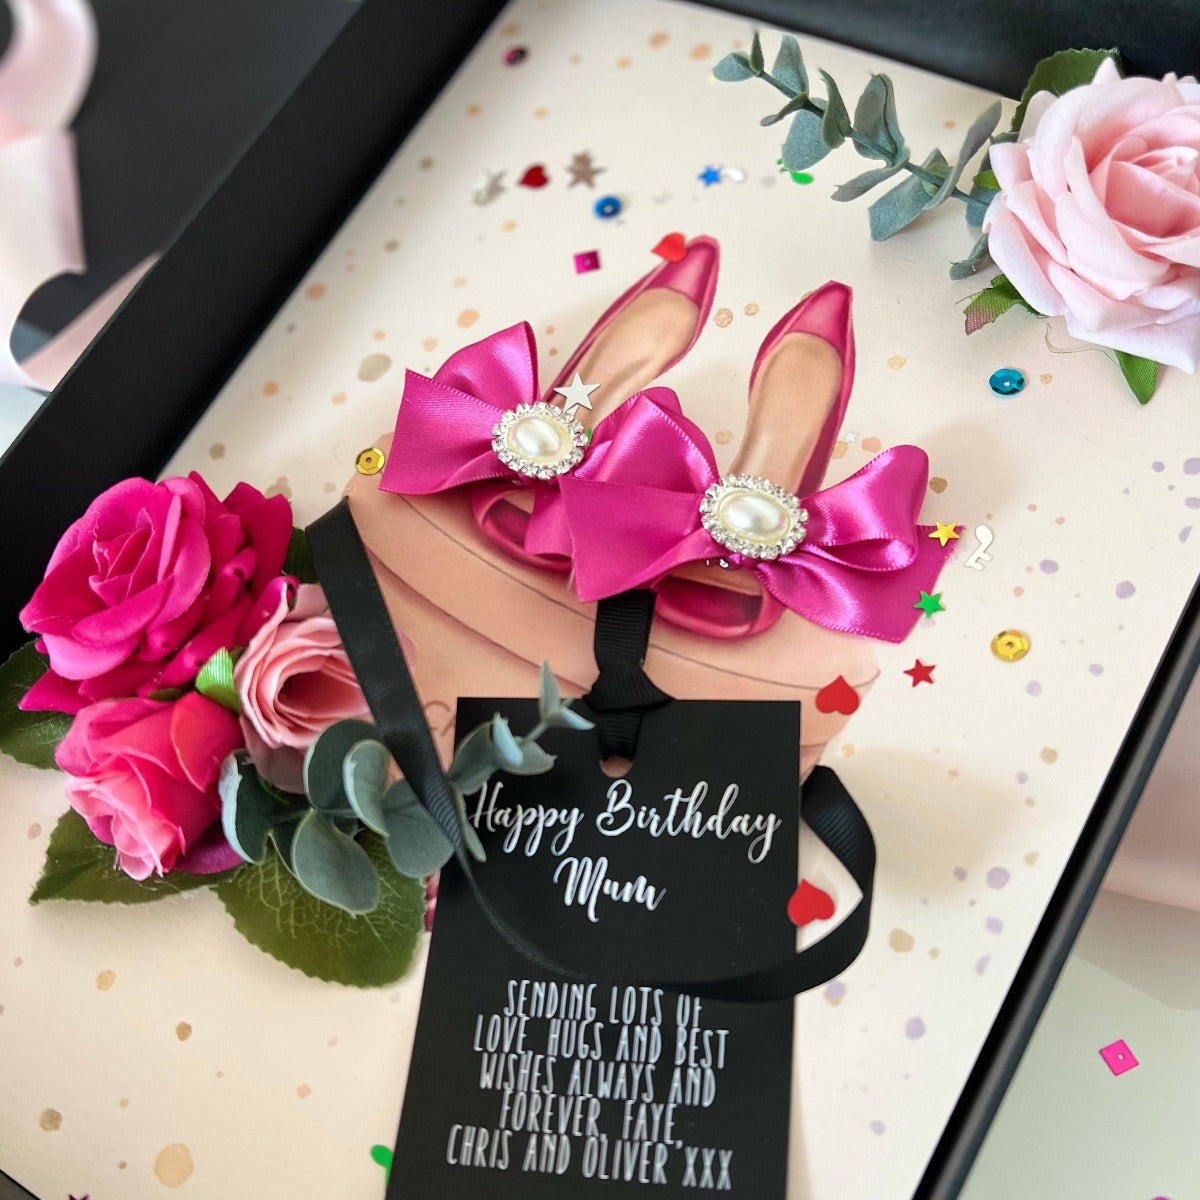 luxury mum birthday cards from daughter and husband | The Luxe Co